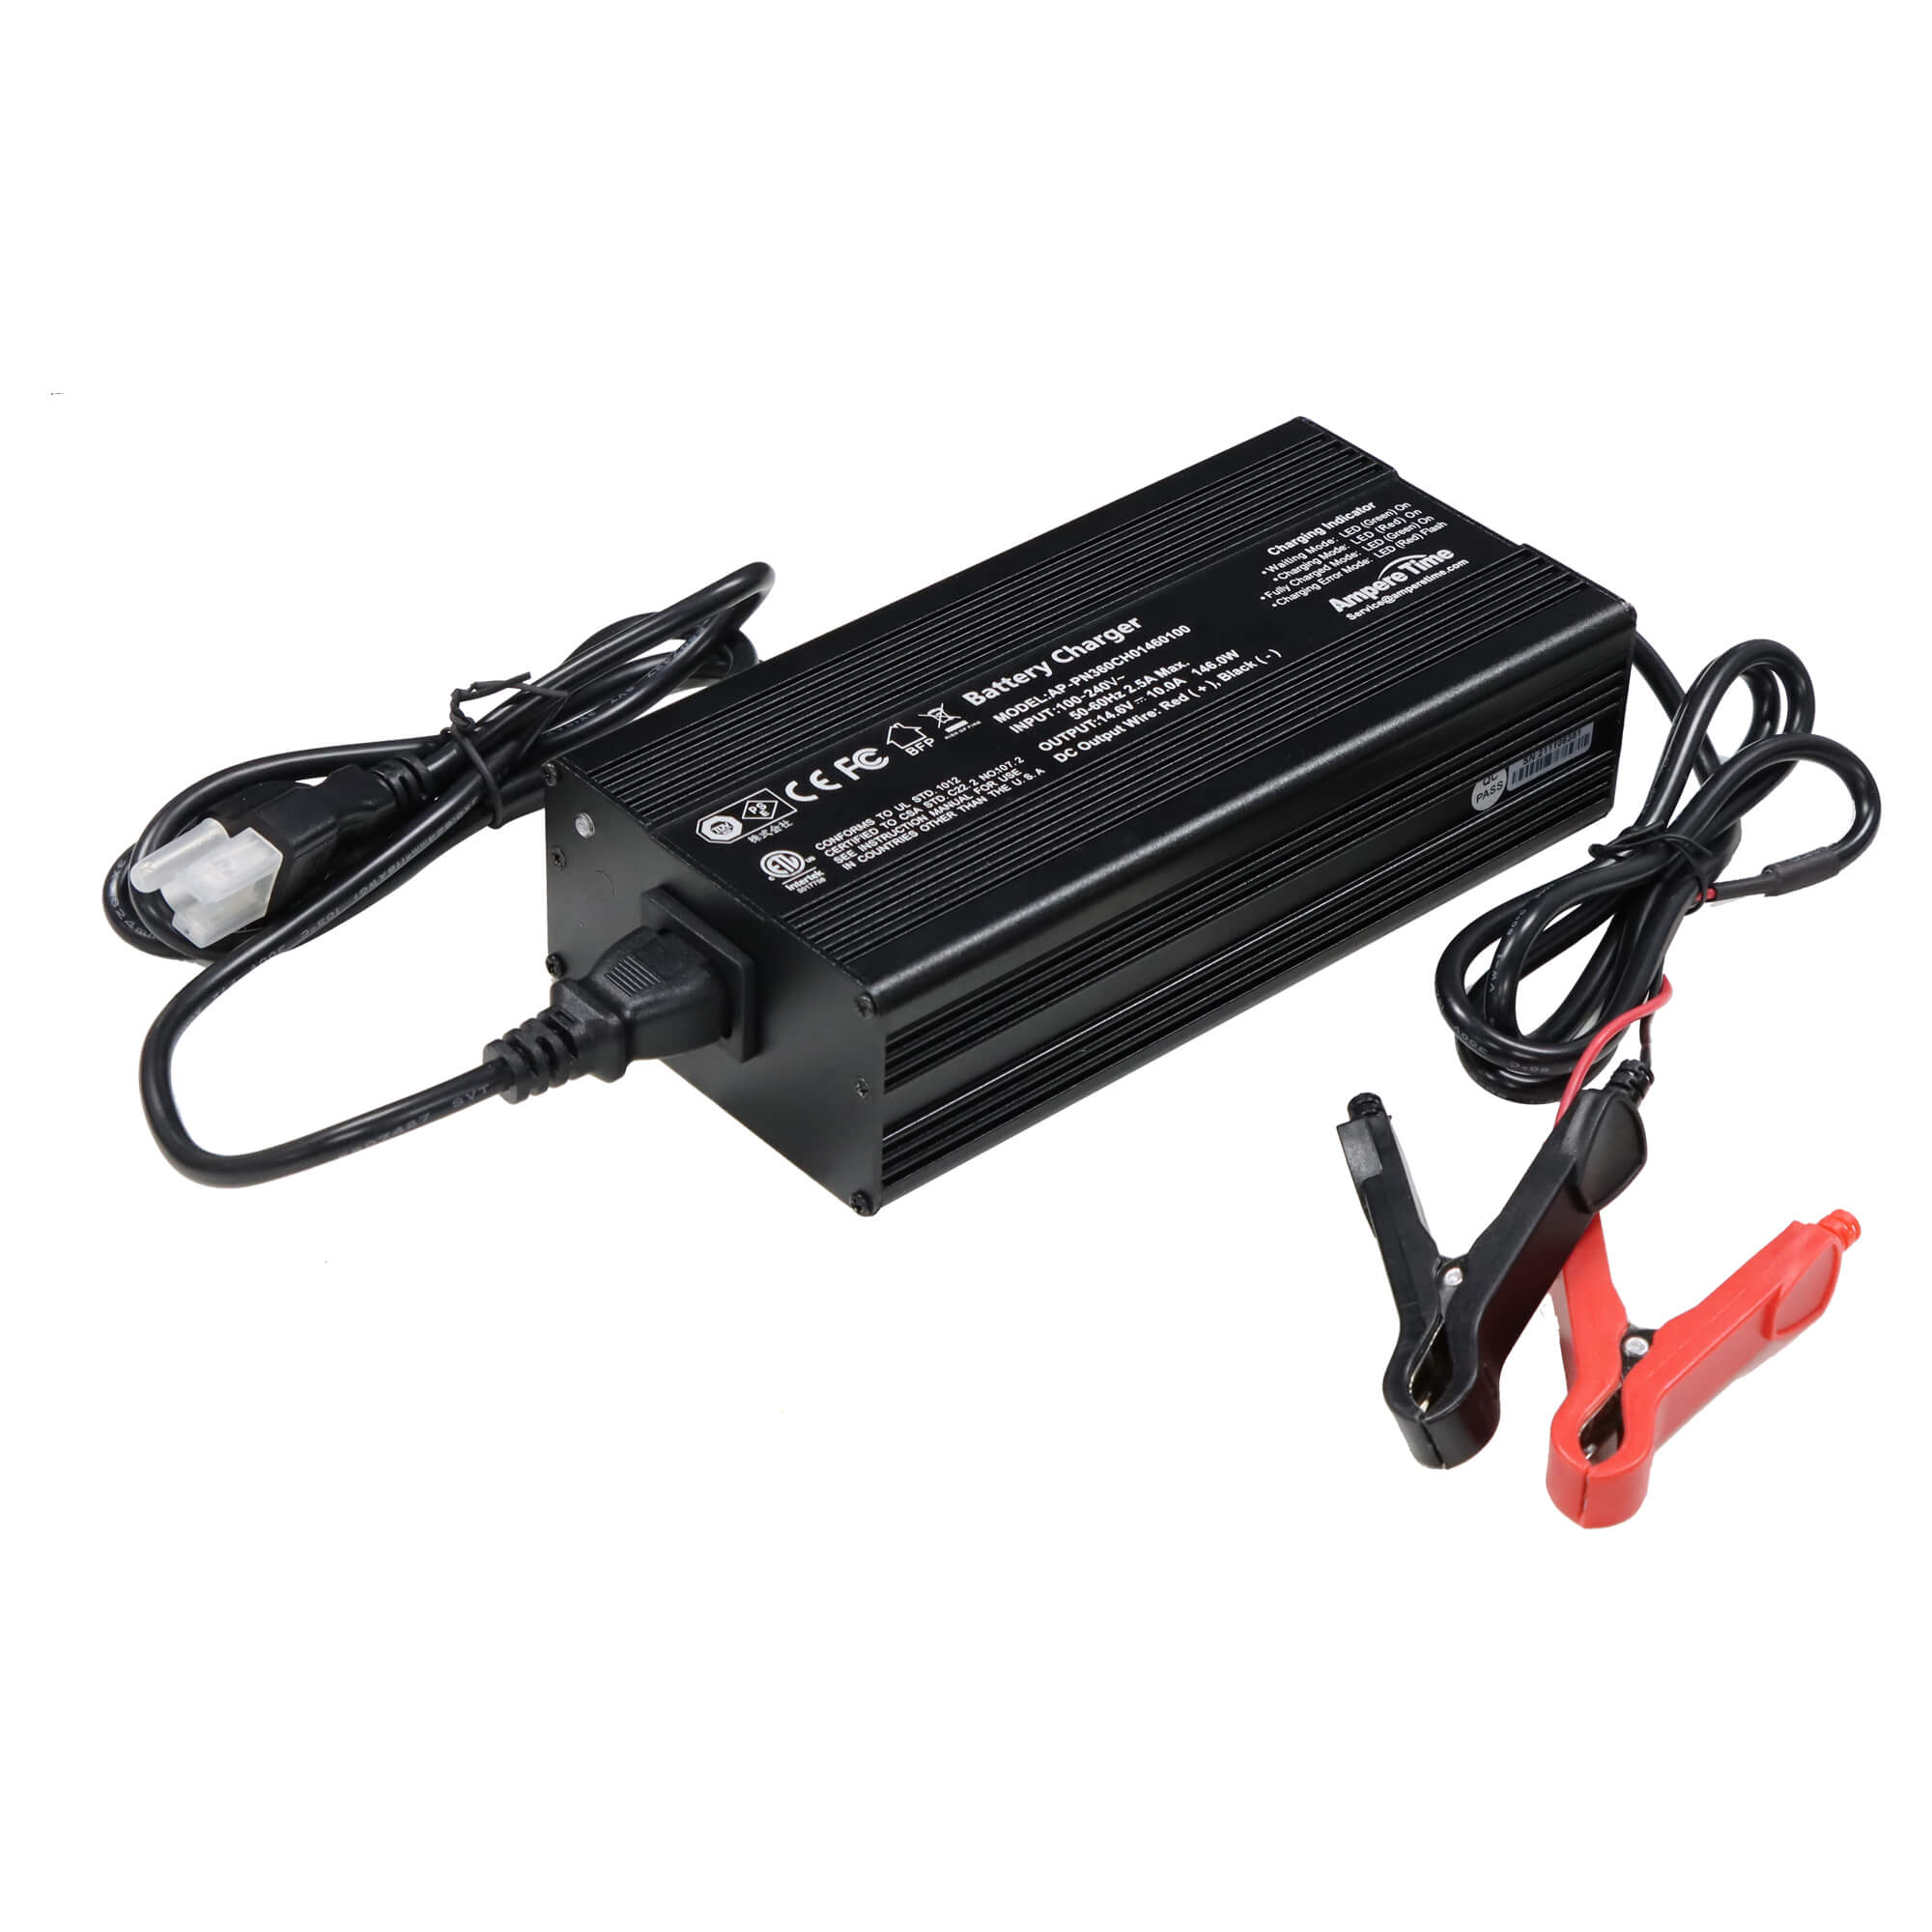 Ampere Time 14.6V 10A Dedicated LiFePO4 Battery Charger with Trickle Charging Battery Maintainer, 90% Charging Efficiency